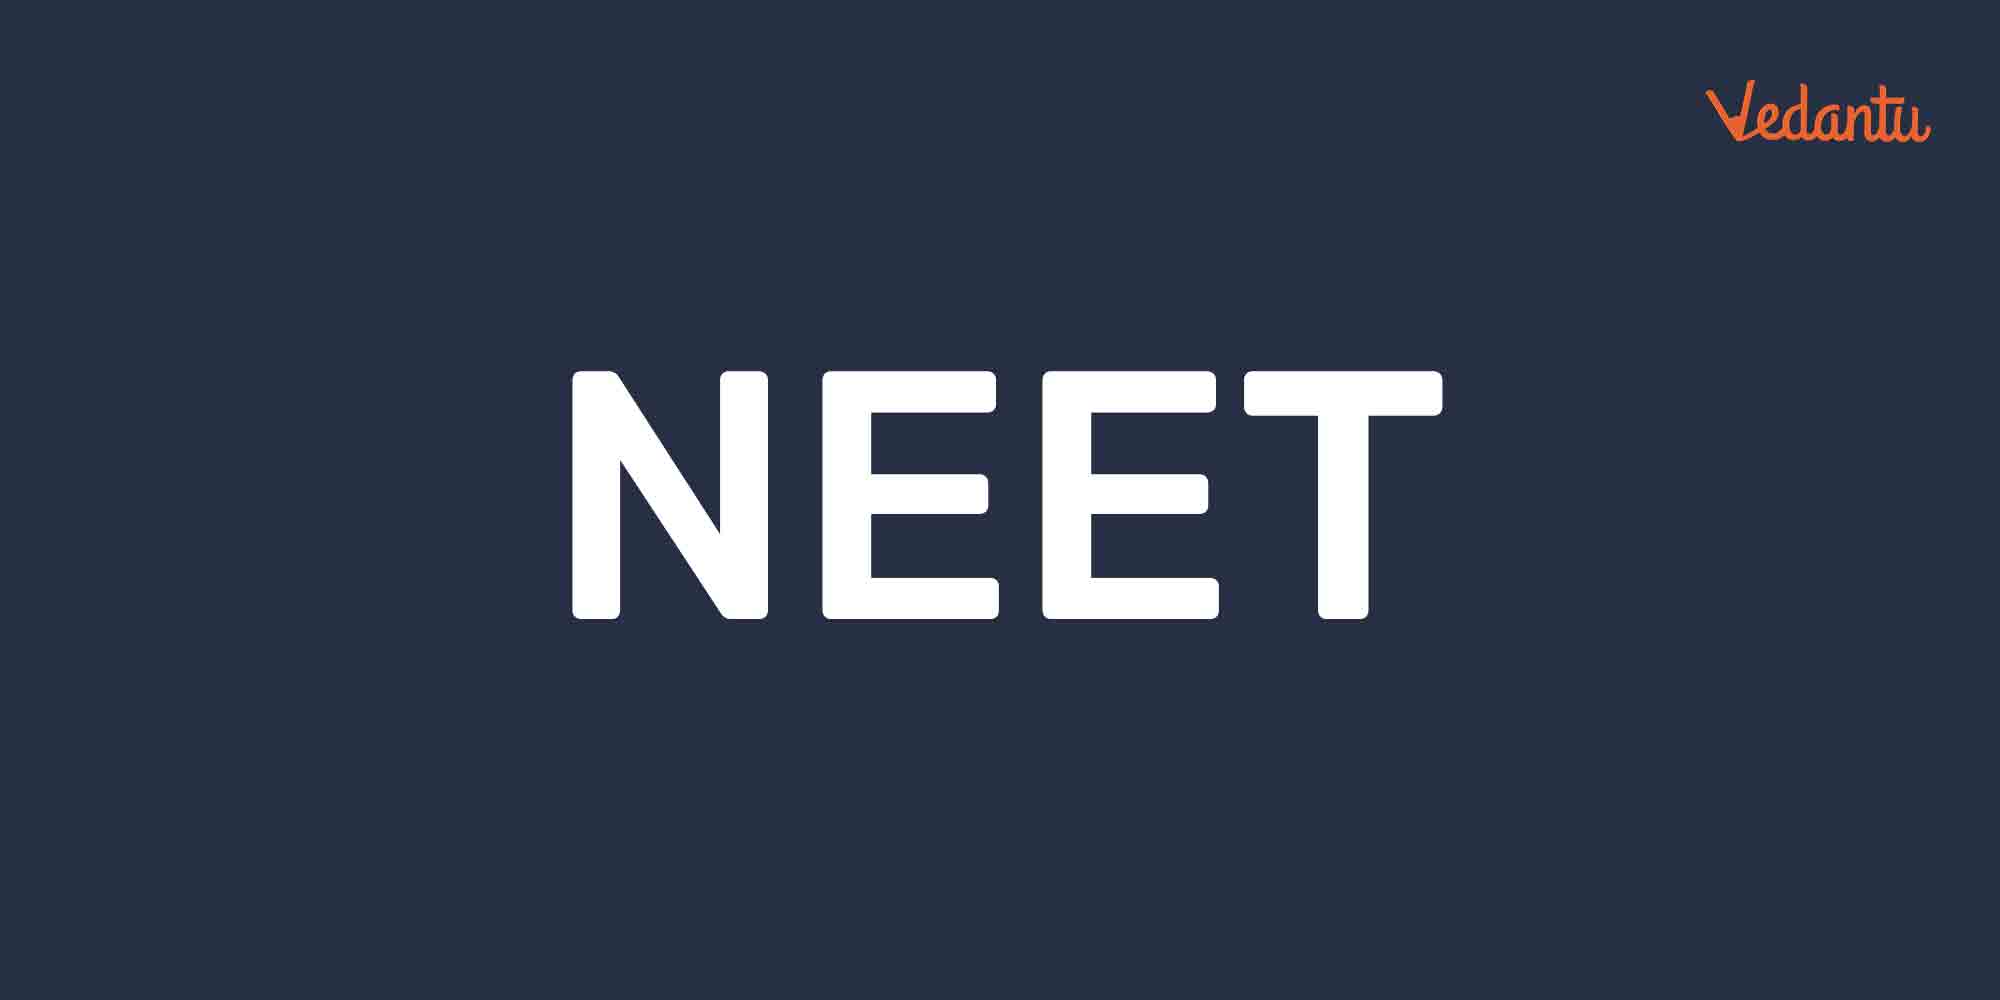 What are the 10 Qualities that a NEET Aspirant should have?